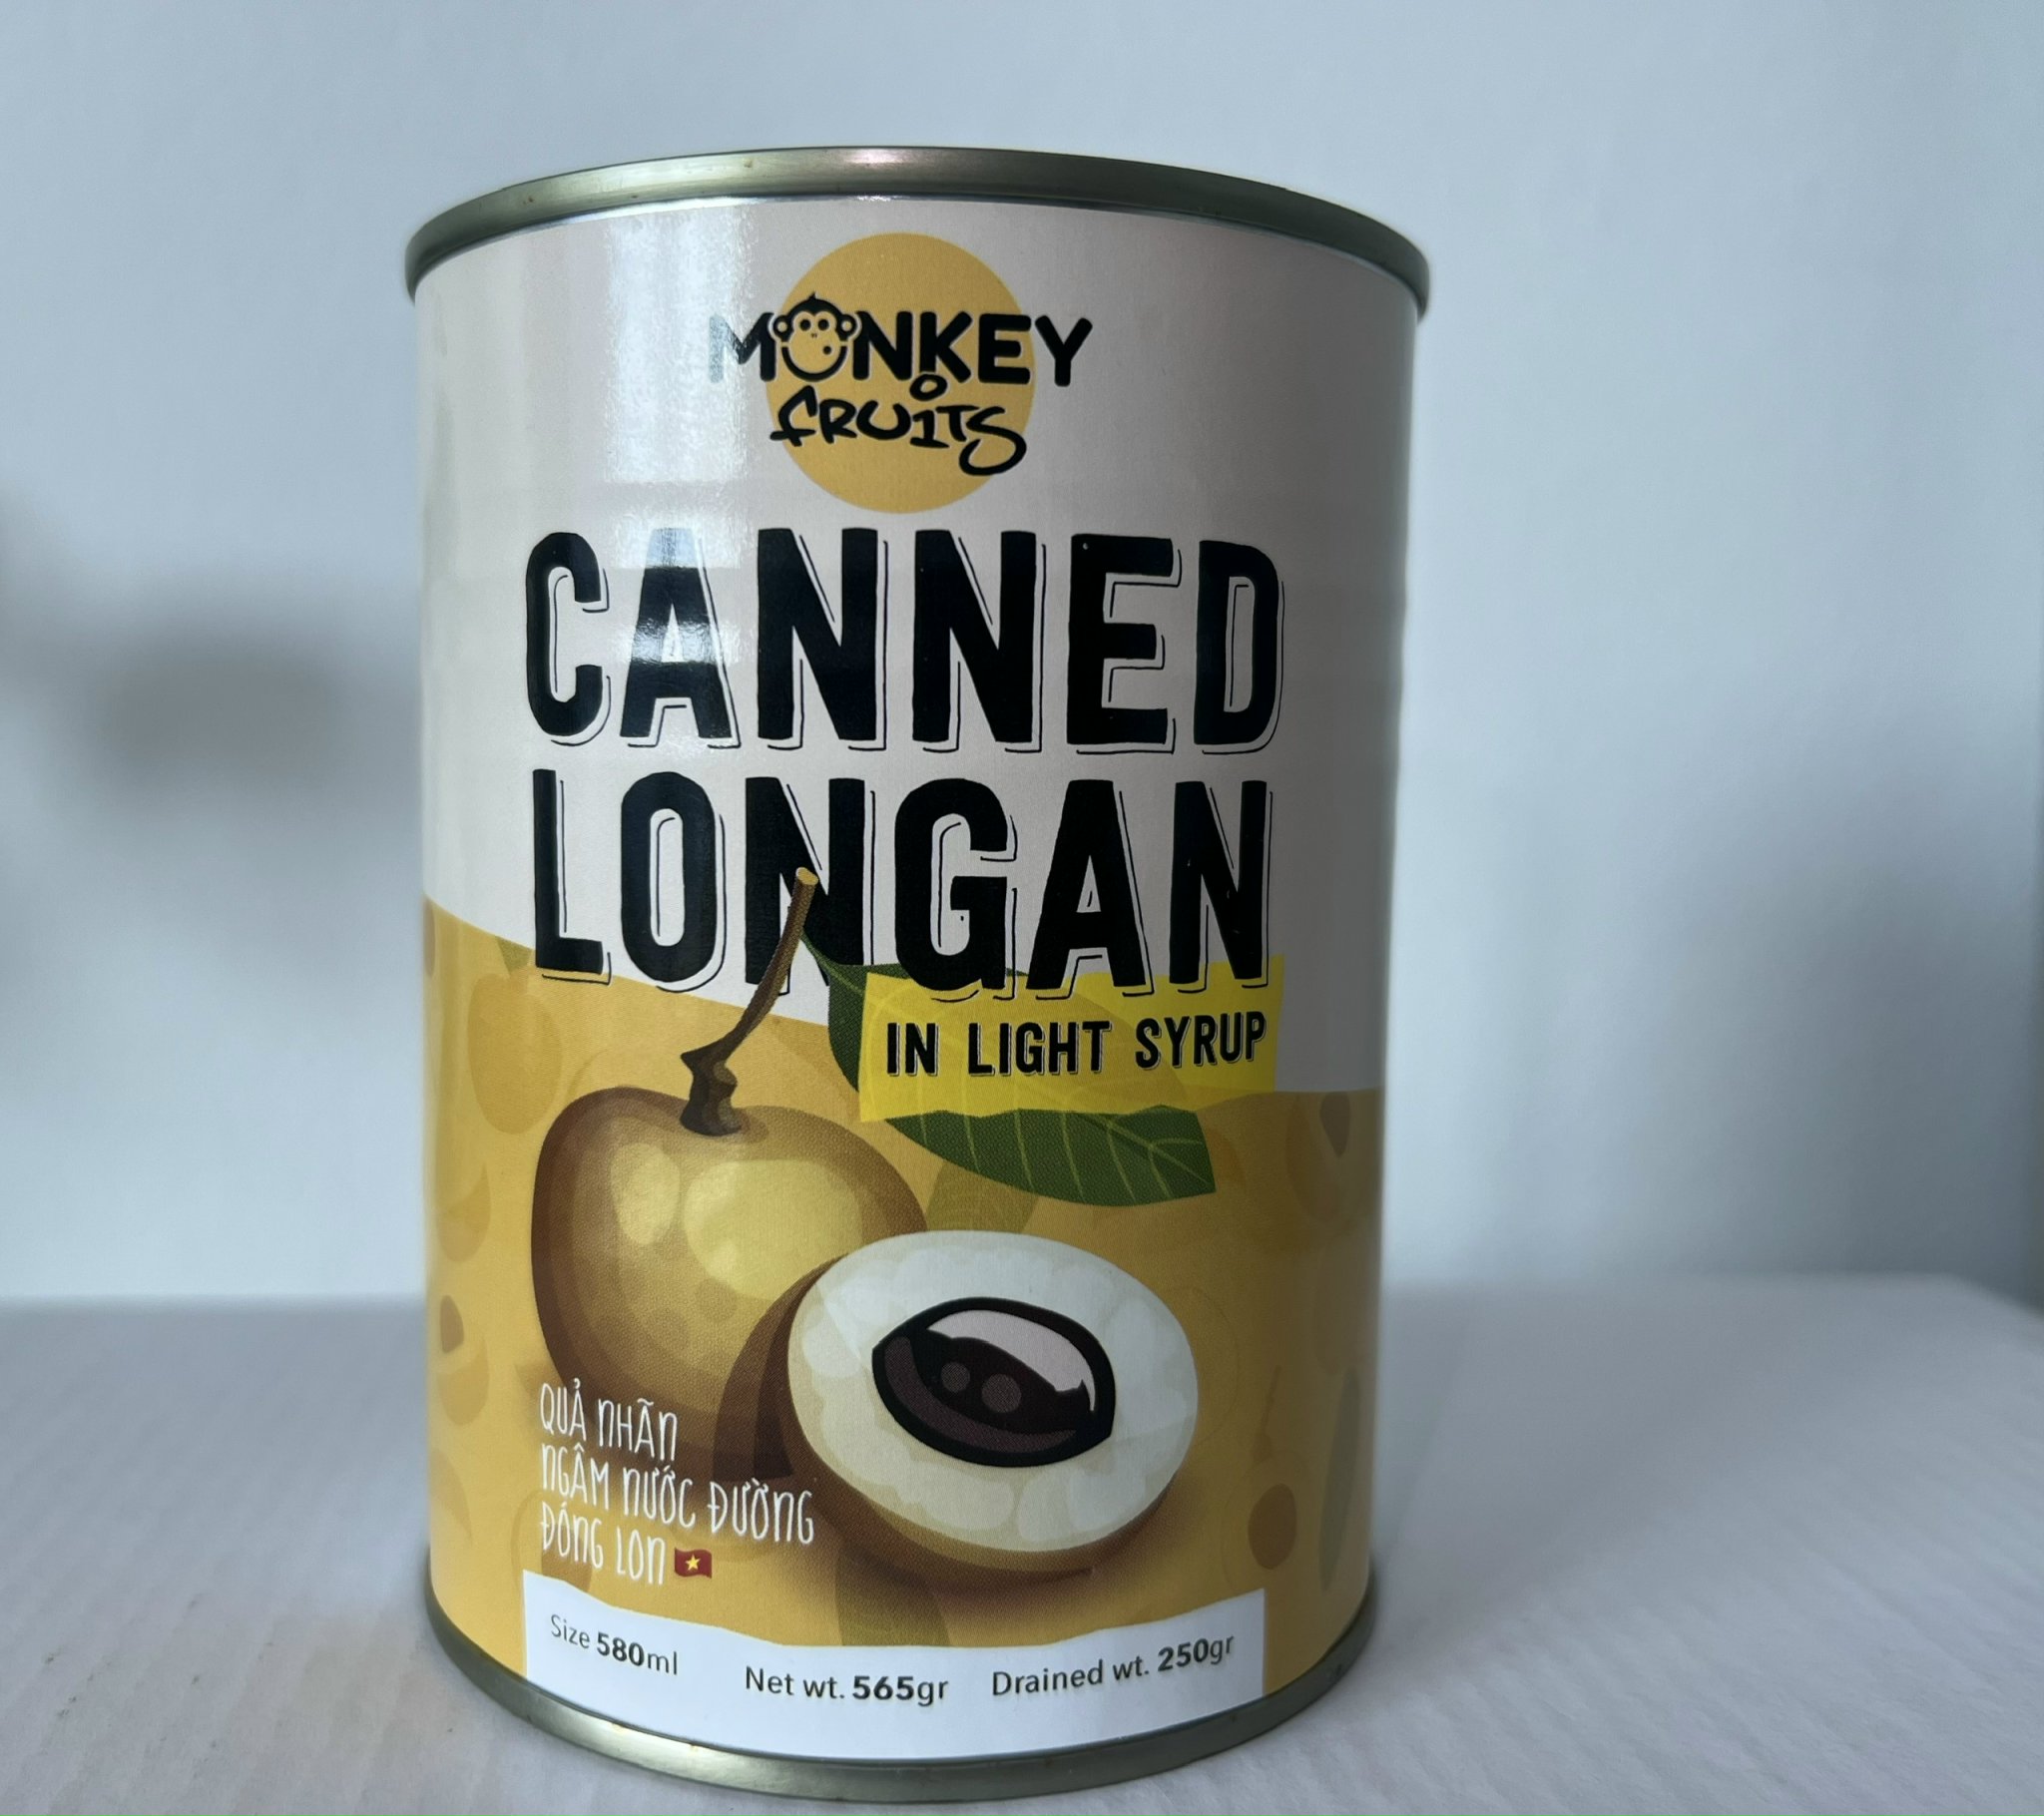 Canned Longan in light syrup